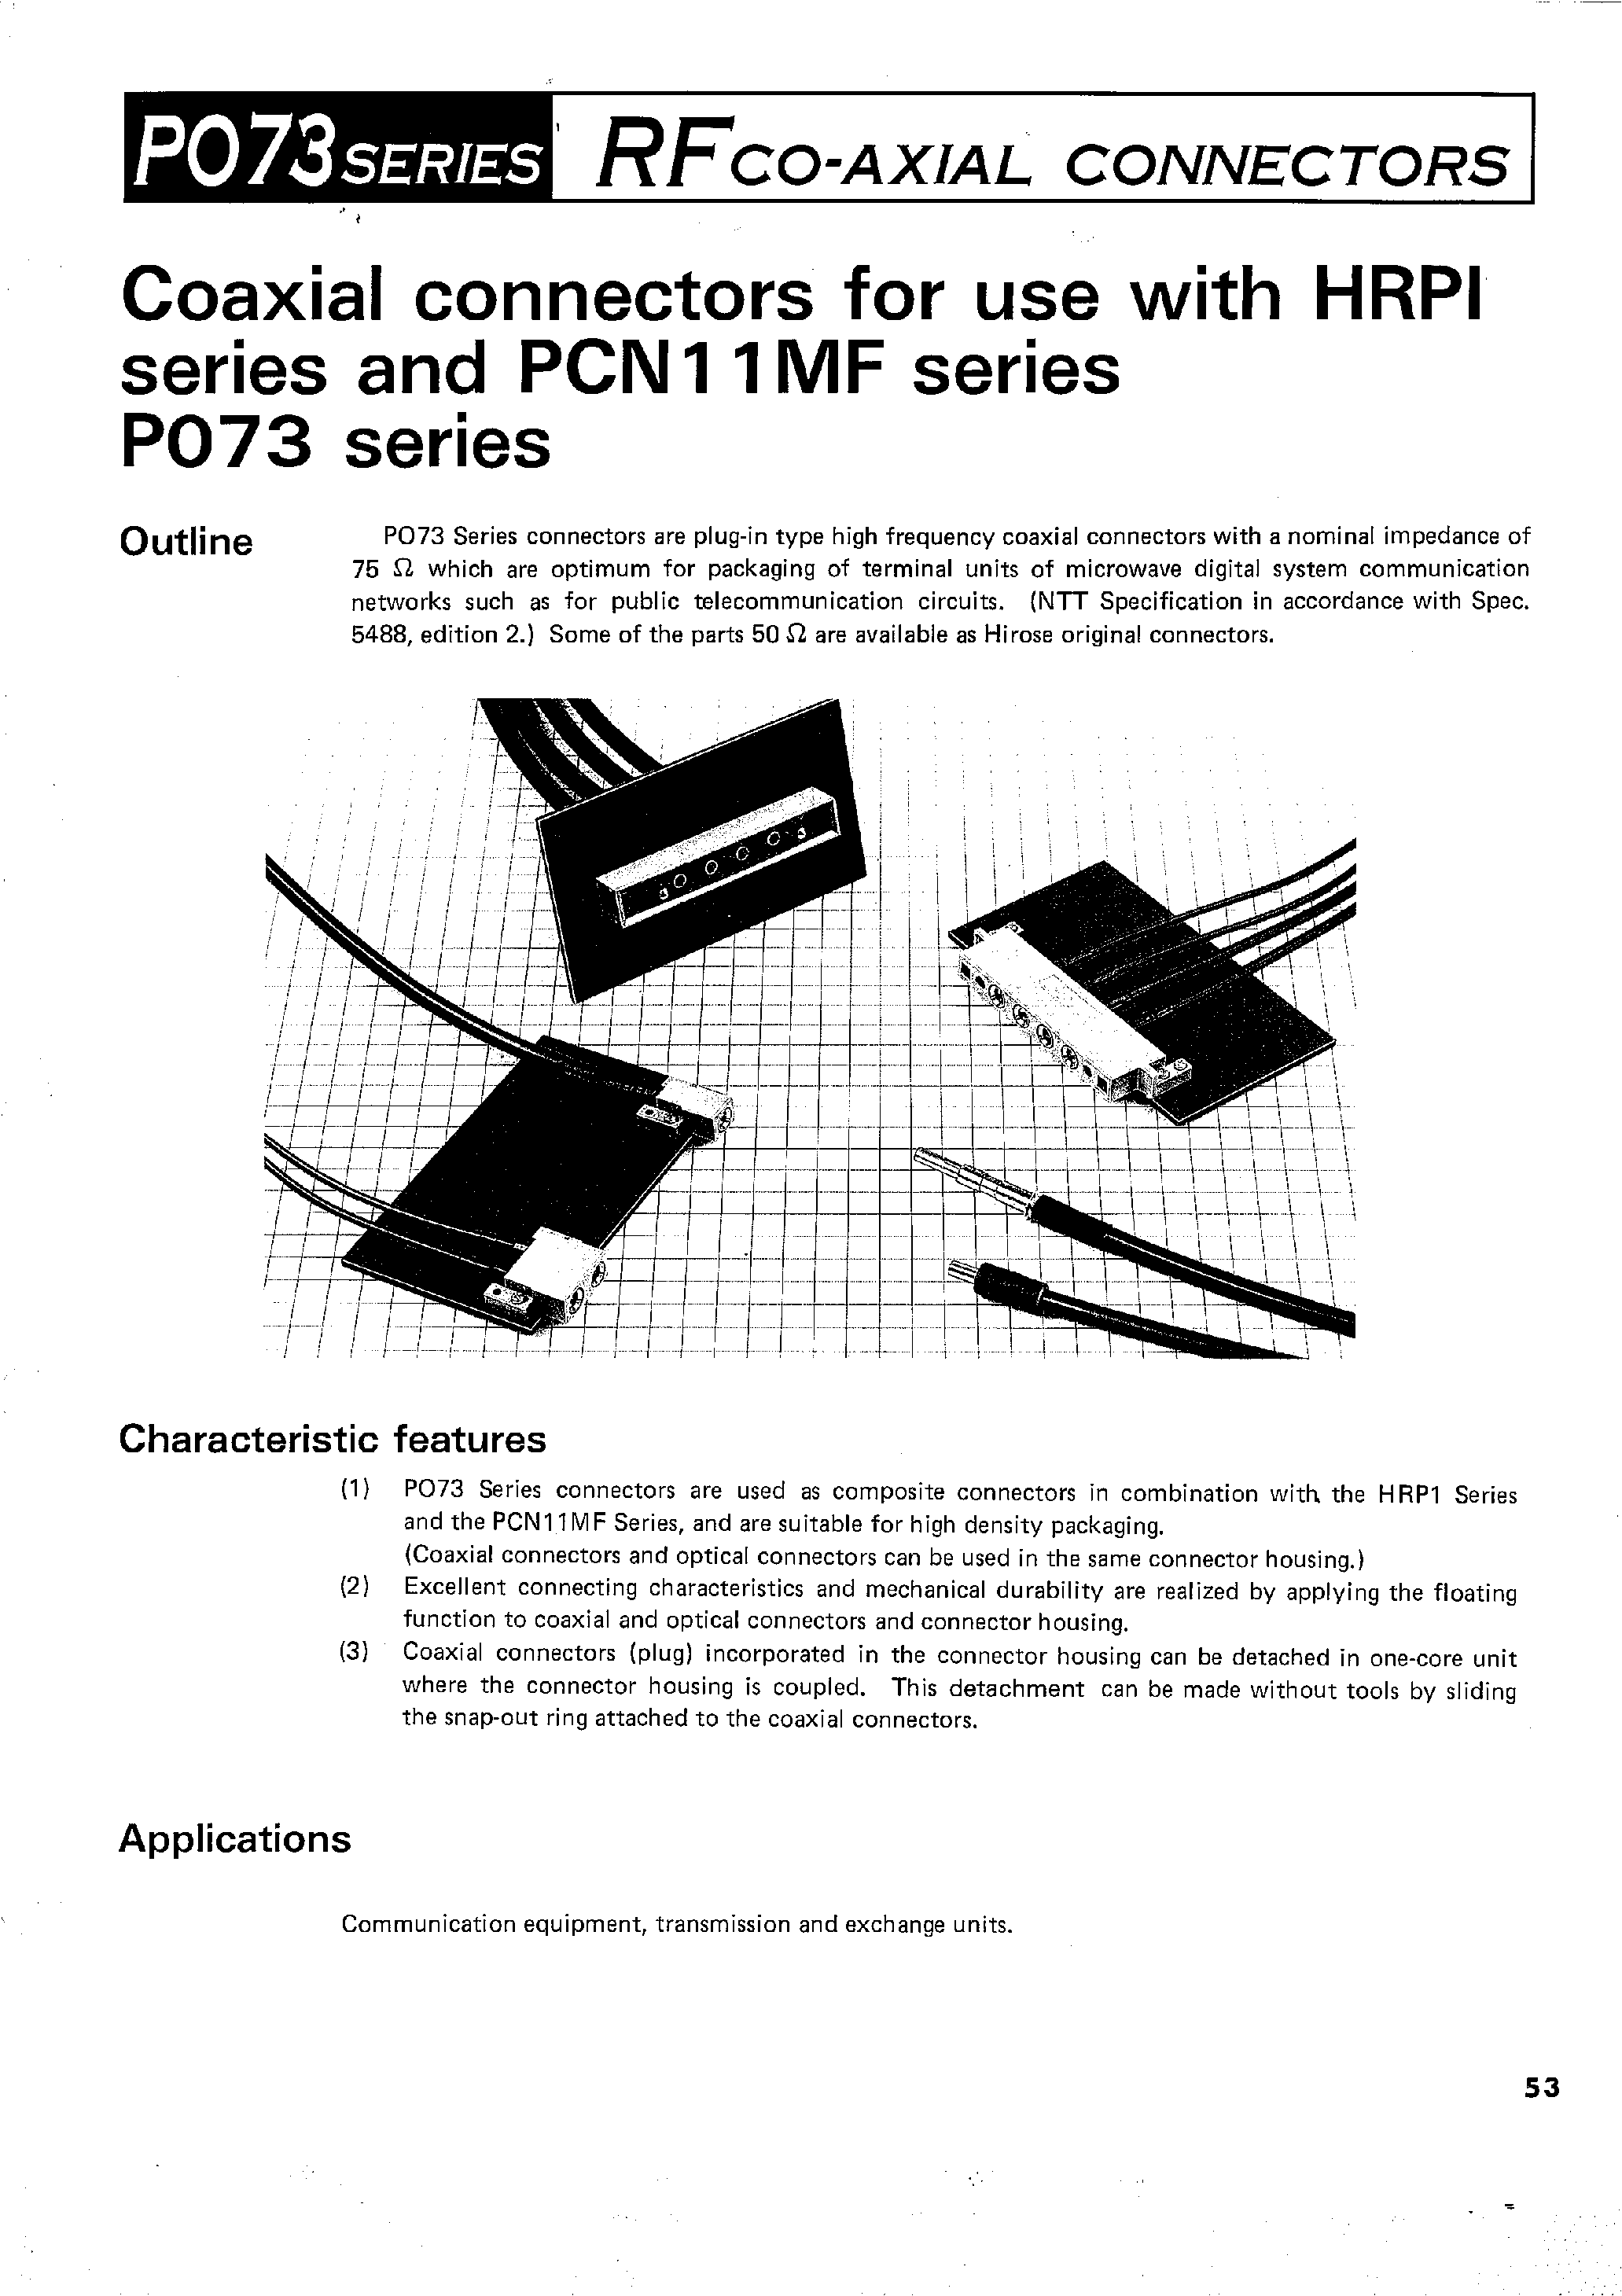 Даташит PO73-P-3CV - RFCO-AXIAL CONNECTORS(COAXIAL CONNECTORS for use with HRPI) страница 1